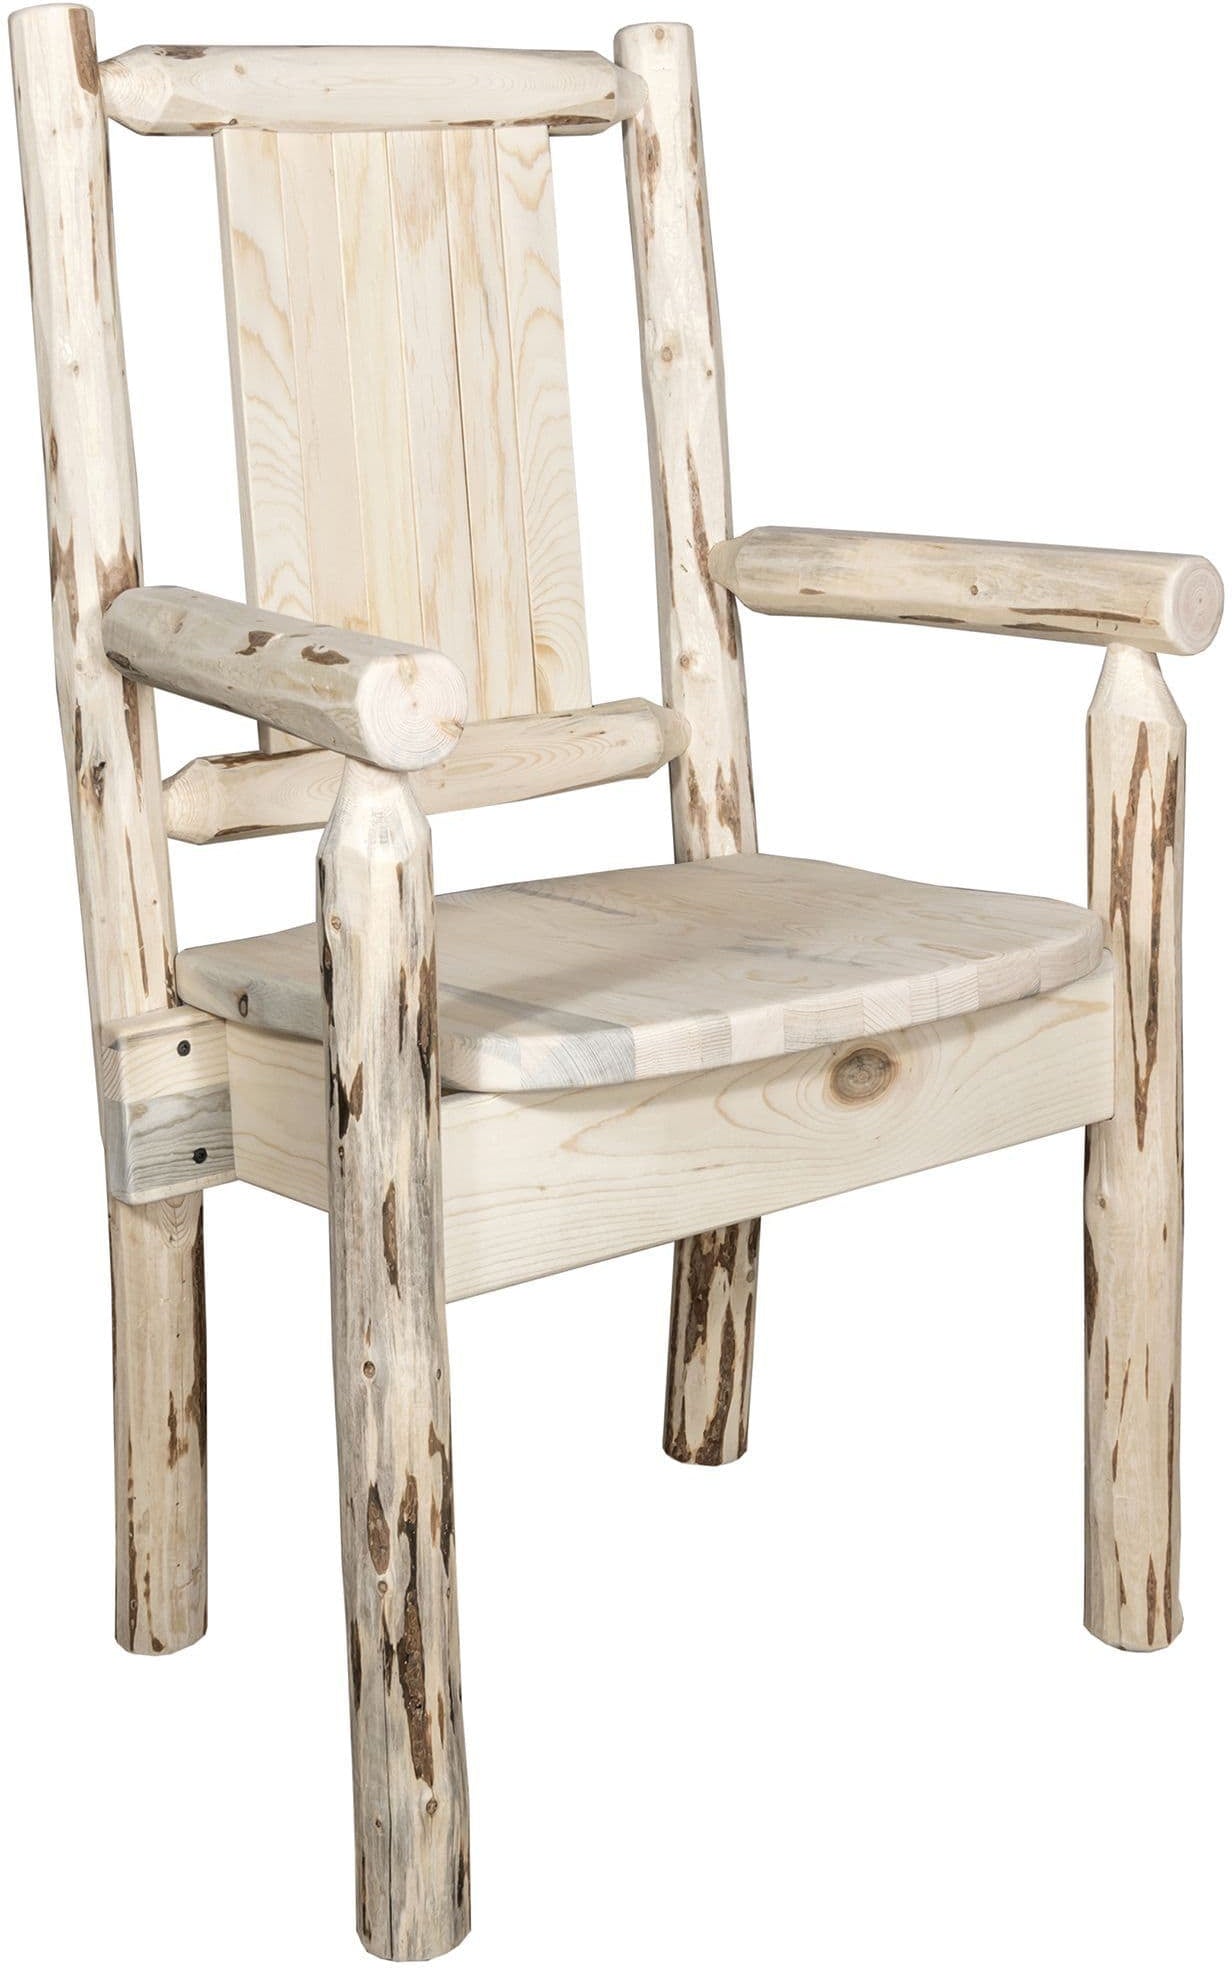 Montana Woodworks Montana Collection Captain's Chair with Laser Engraved Design - Clear Lacquer Finish-Rustic Furniture Marketplace